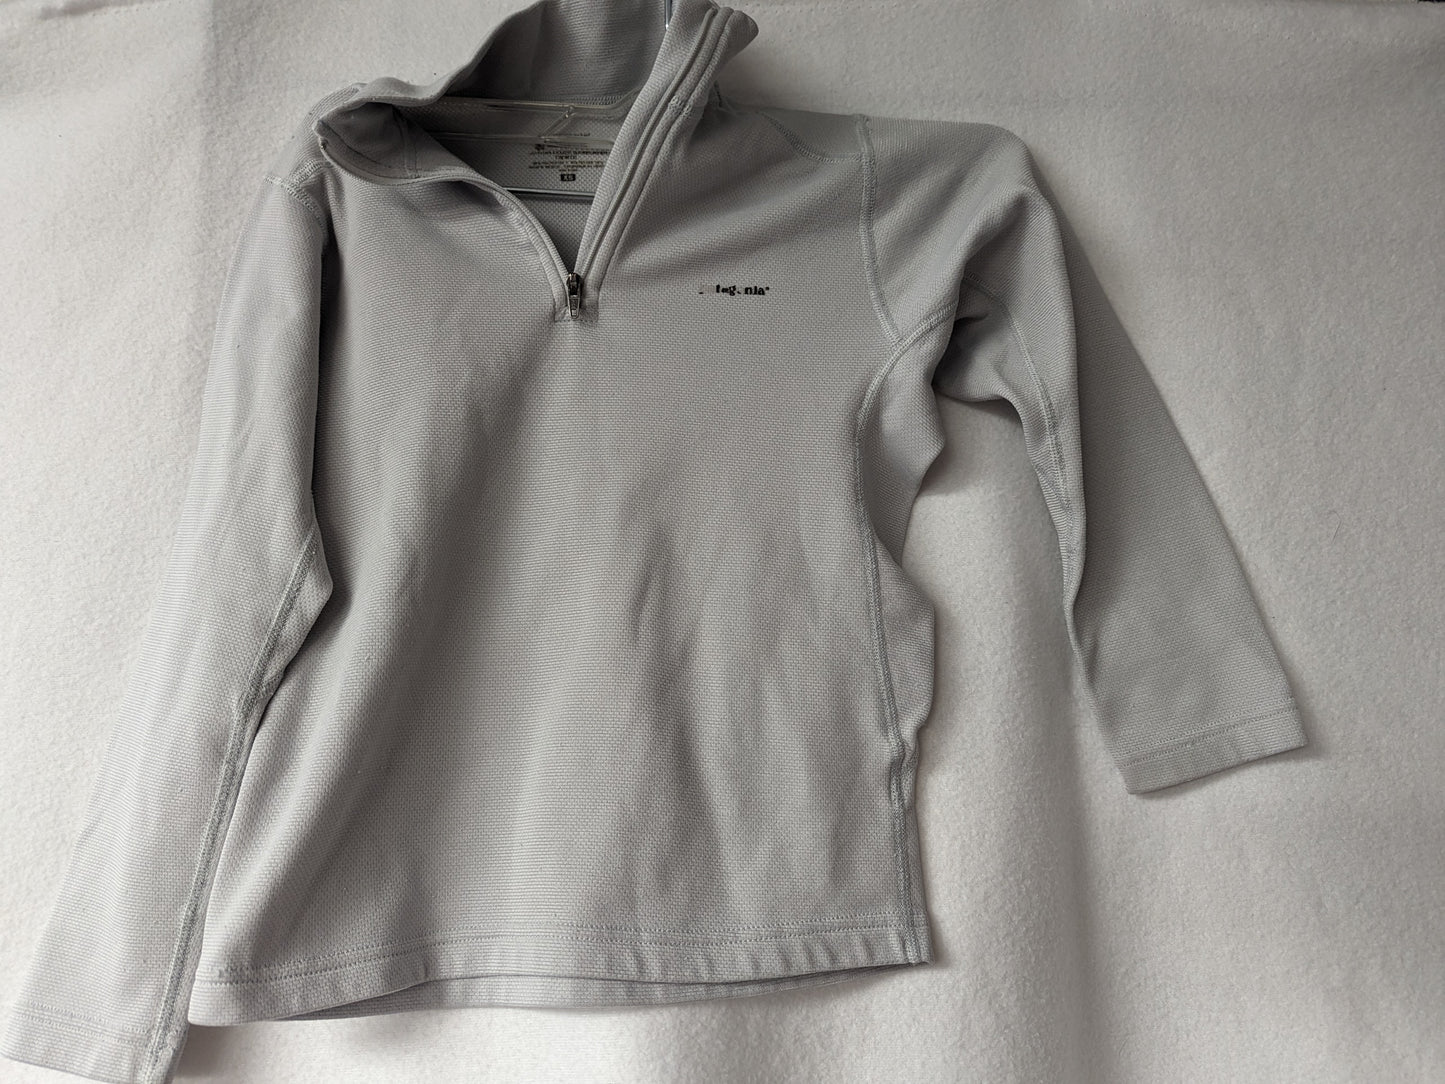 Patagonia Youth Half Zip Pull Over Size Youth Extra Small Color Gray Condition Used